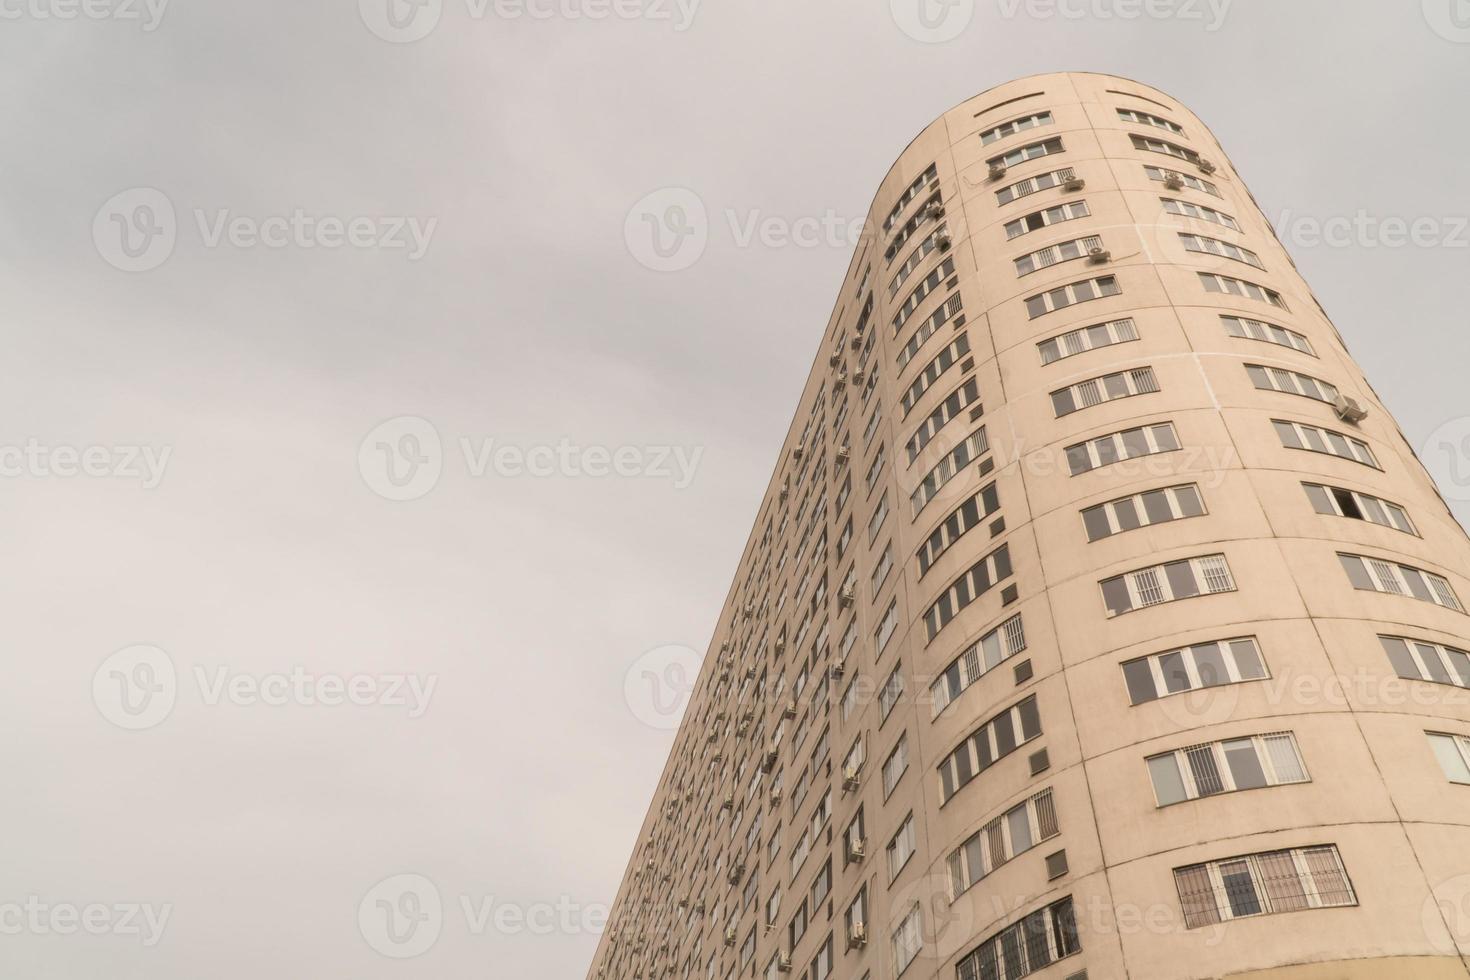 Multi storey residential complex against the sky. Urban architecture photo